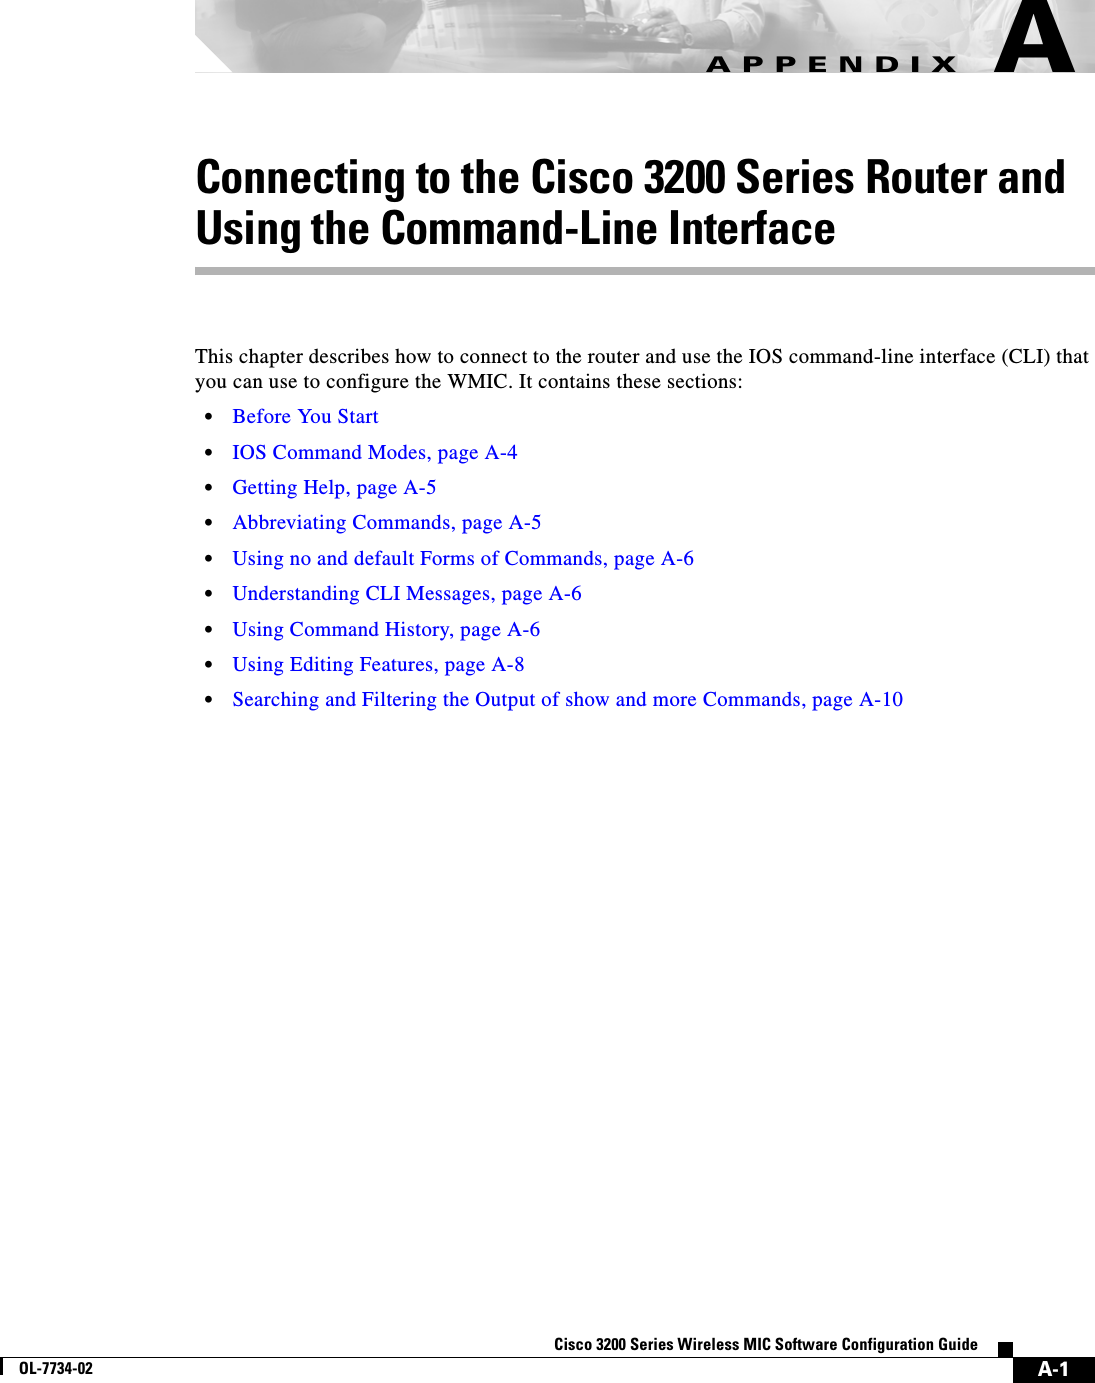 A-1Cisco 3200 Series Wireless MIC Software Configuration GuideOL-7734-02APPENDIXAConnecting to the Cisco 3200 Series Router and Using the Command-Line InterfaceThis chapter describes how to connect to the router and use the IOS command-line interface (CLI) that you can use to configure the WMIC. It contains these sections:•Before You Start•IOS Command Modes, page A-4•Getting Help, page A-5•Abbreviating Commands, page A-5•Using no and default Forms of Commands, page A-6•Understanding CLI Messages, page A-6•Using Command History, page A-6•Using Editing Features, page A-8•Searching and Filtering the Output of show and more Commands, page A-10